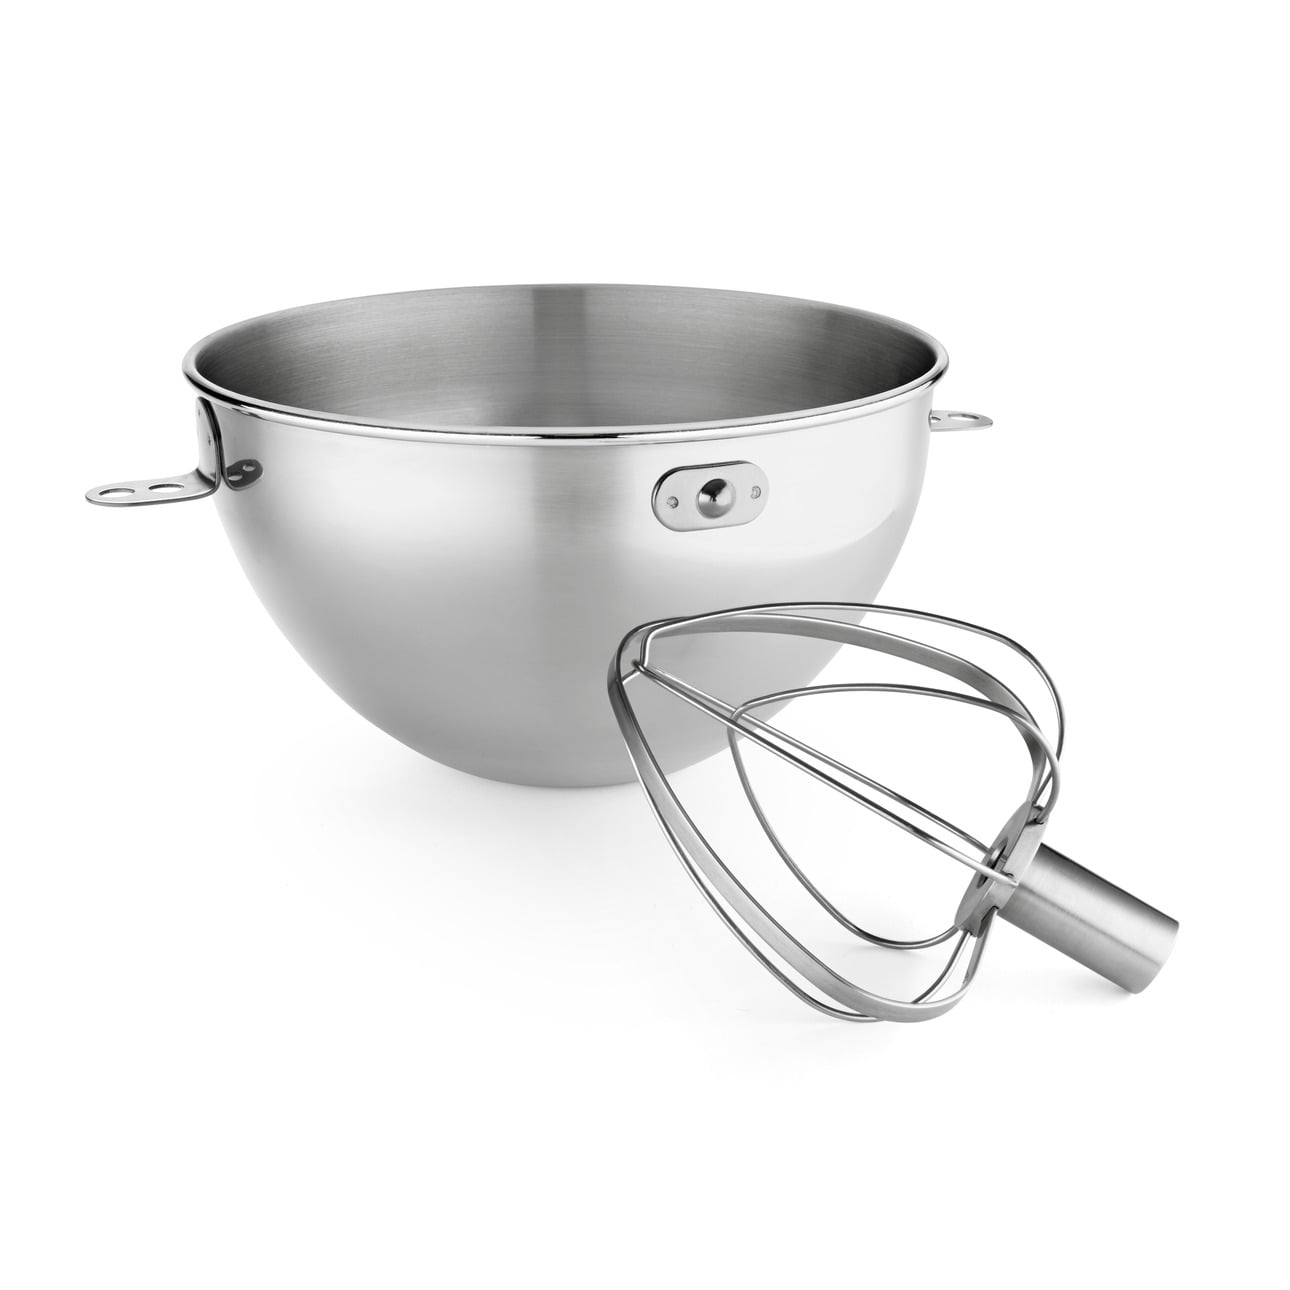 GVODE Stainless Steel Flex Edge Beater for KitchenAid Mixer, Fits Tilt-Head  Stand Mixer Bowls For 4.5-5 qt. Bowls FXKTHP-9008 - The Home Depot